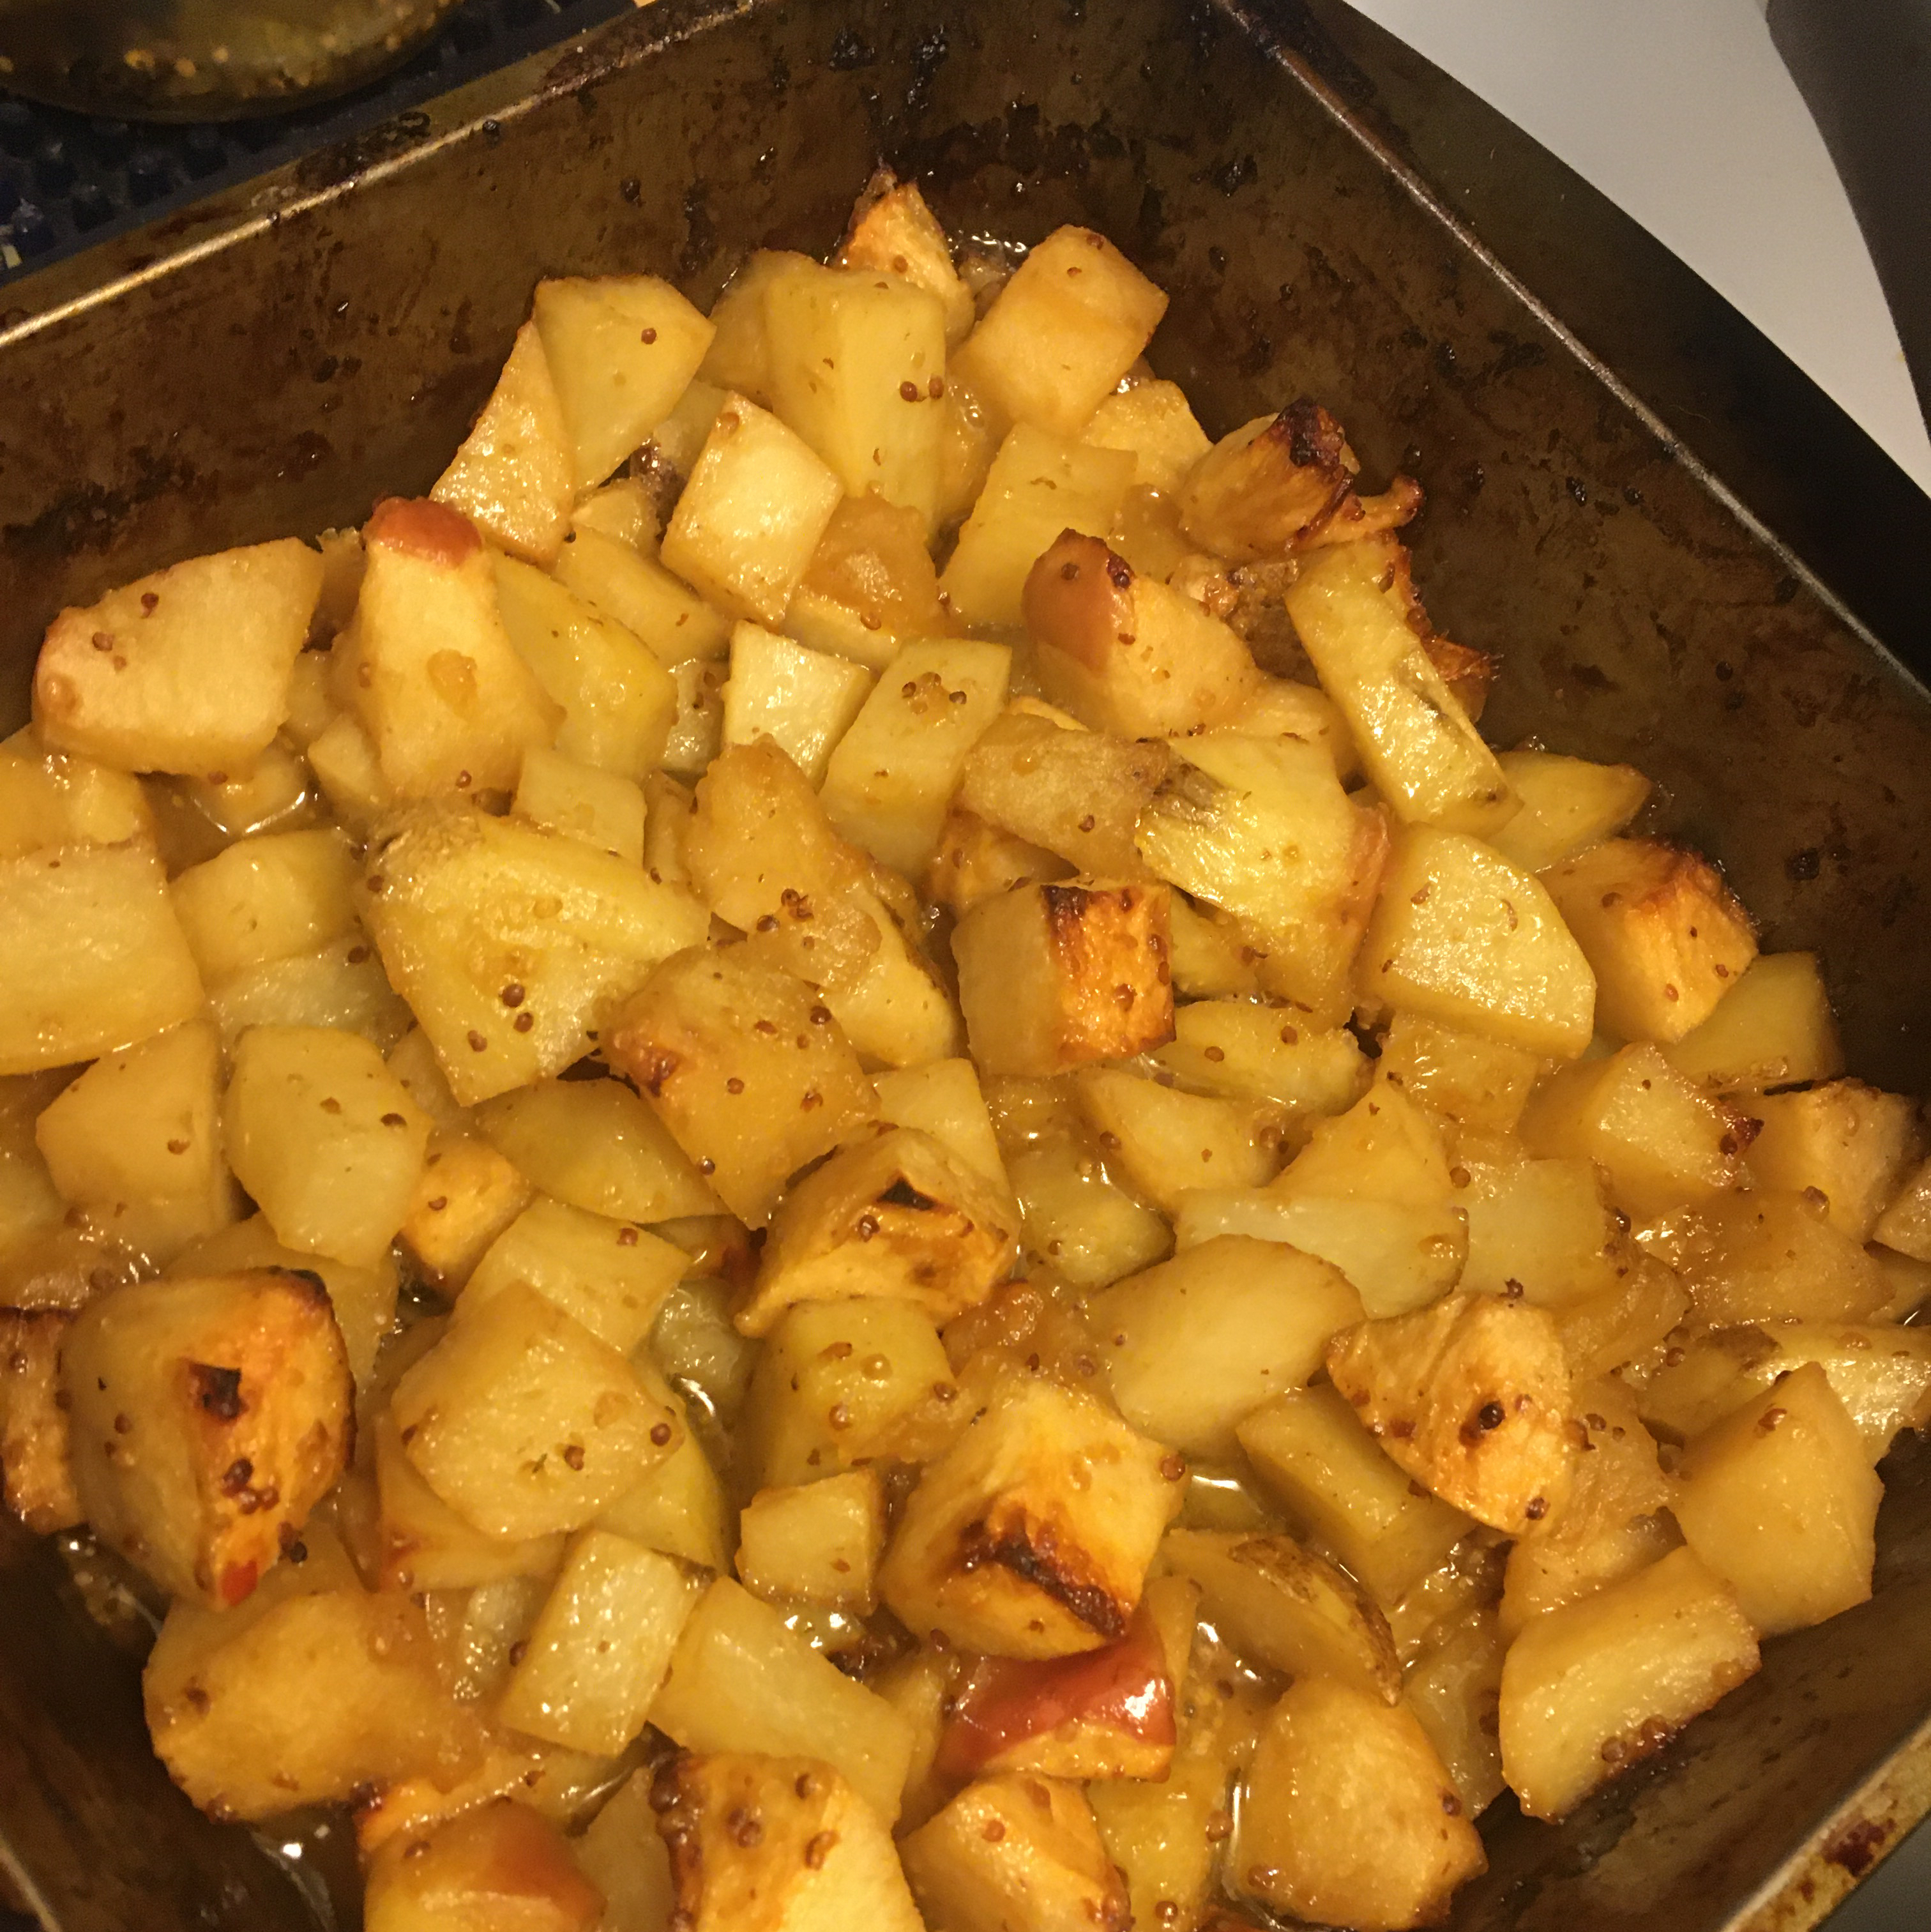 Roasted Potatoes and Apples